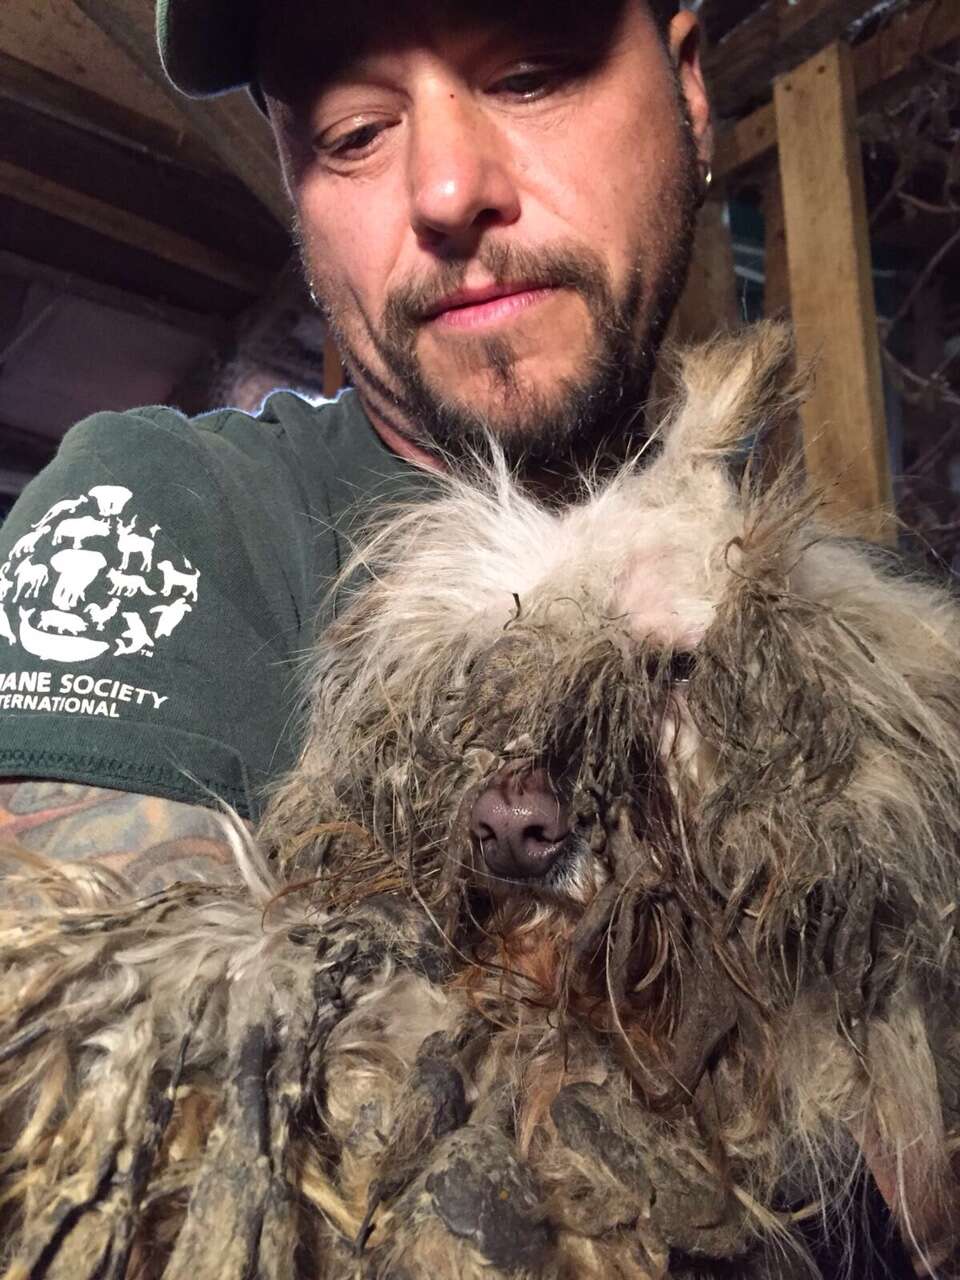 Man holding matted dog rescued from dog meat farm